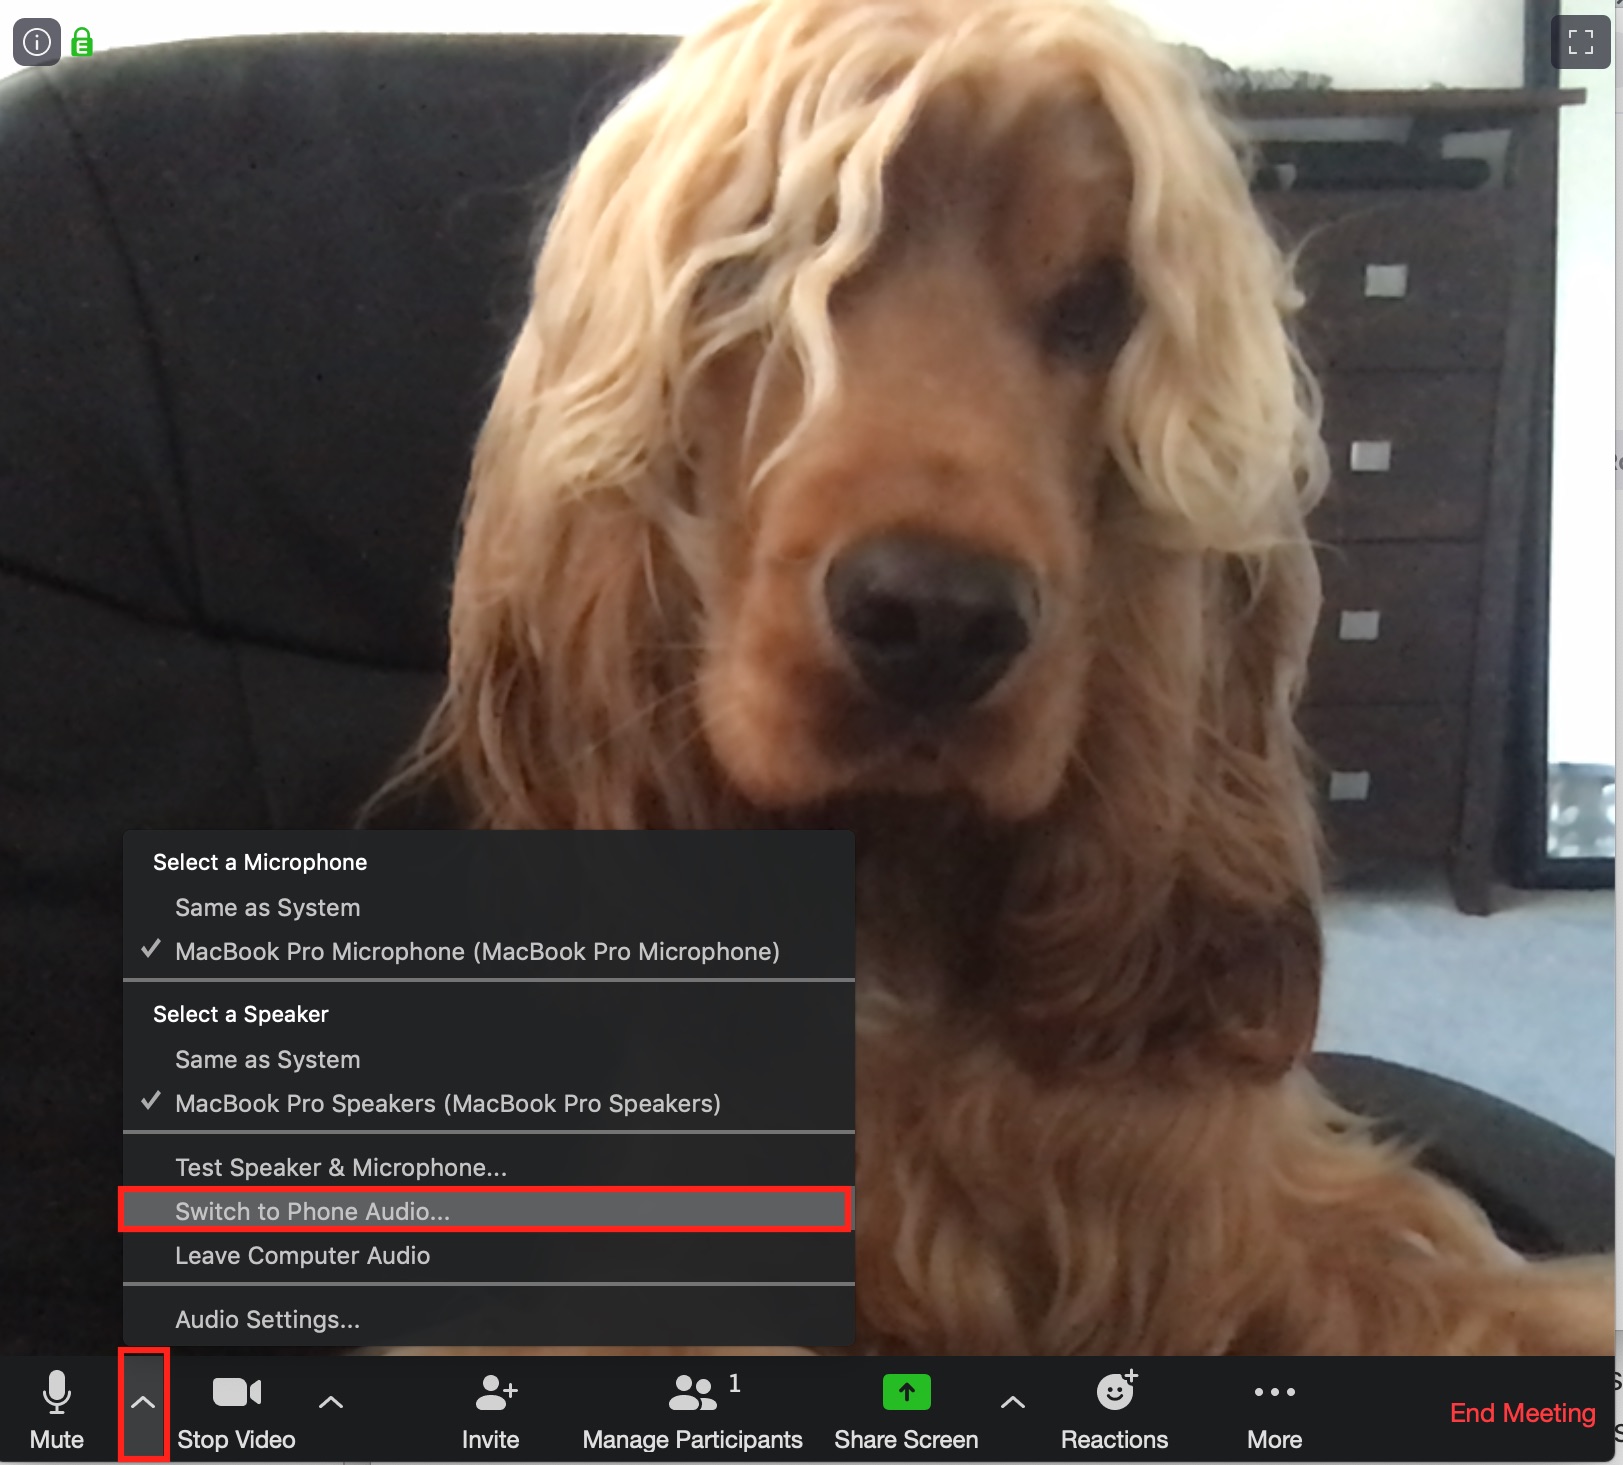 Dog on zoom call - instructions for switch to phone audio